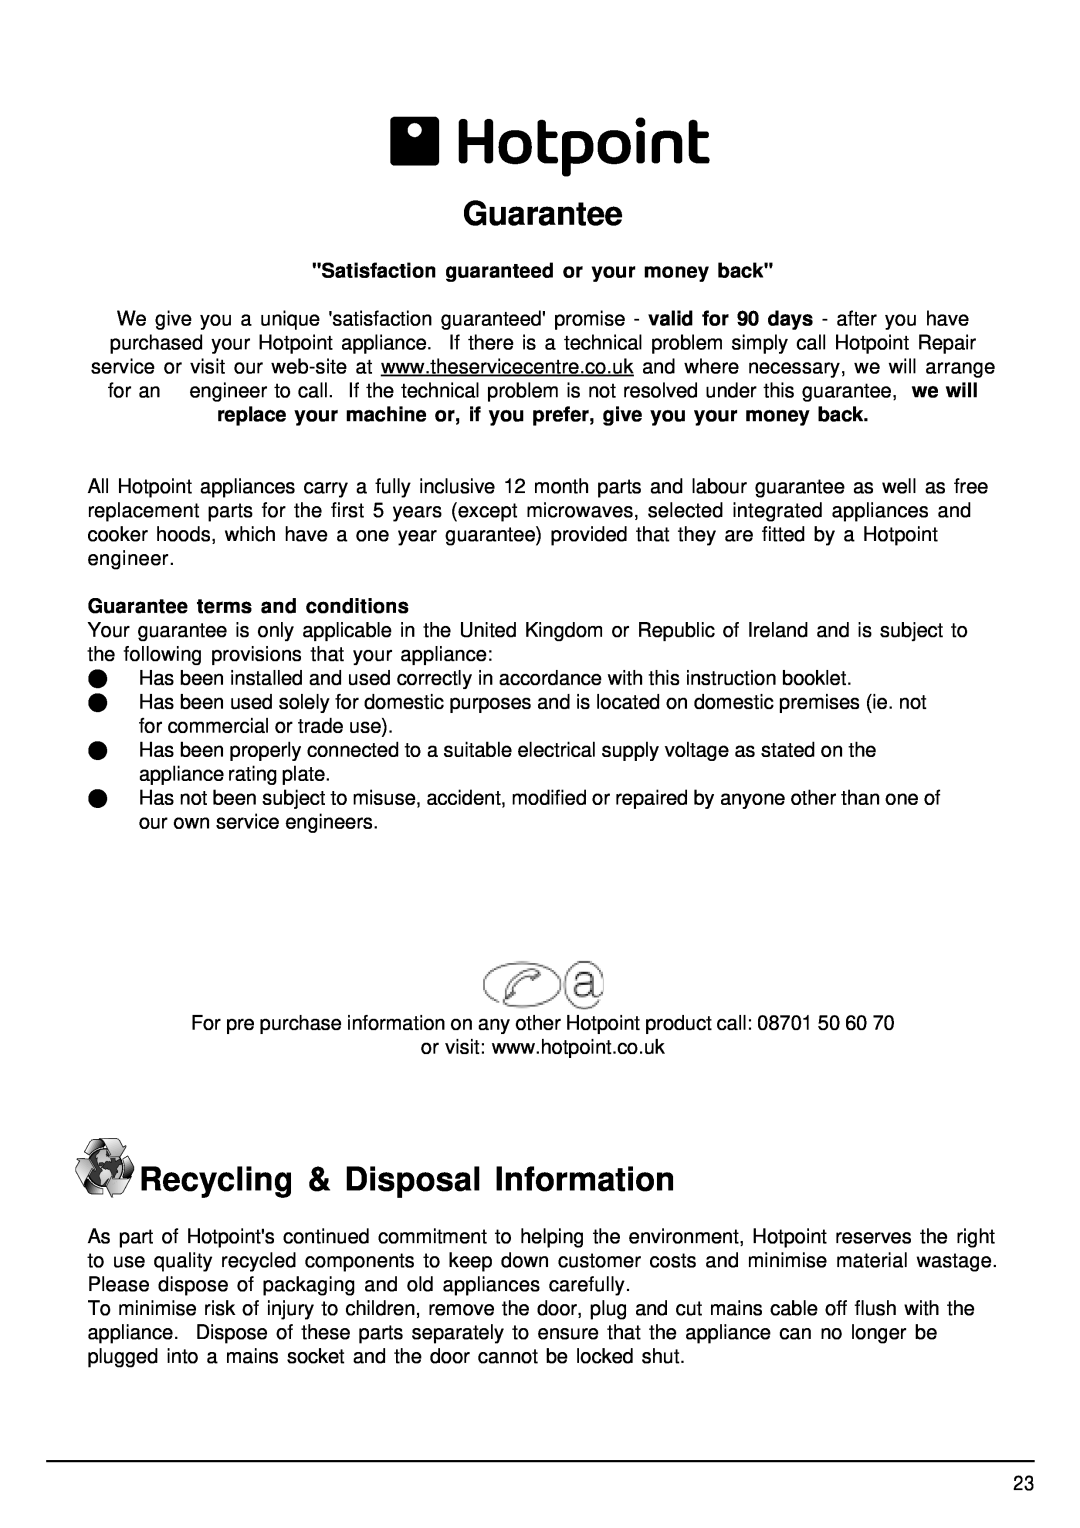 Hotpoint FDW80 manual Guarantee, Recycling & Disposal Information, Satisfaction guaranteed or your money back 